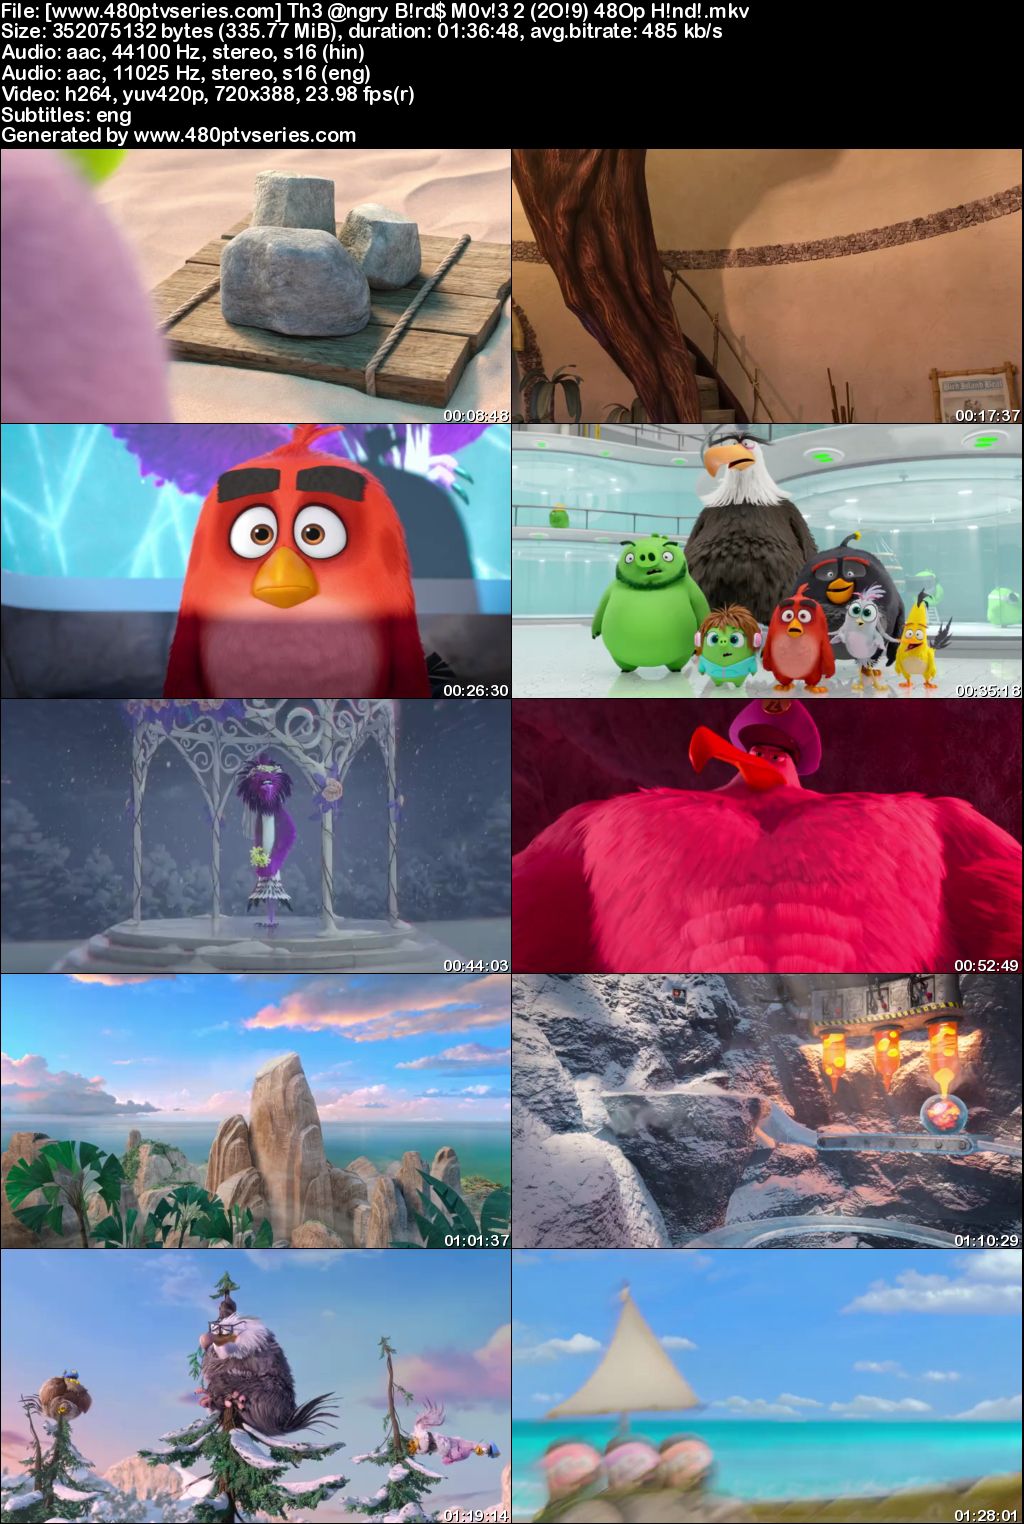 The Angry Birds Movie 2 (2019) 300MB Full Hindi Dual Audio Movie Download 480p Bluray Free Watch Online Full Movie Download Worldfree4u 9xmovies